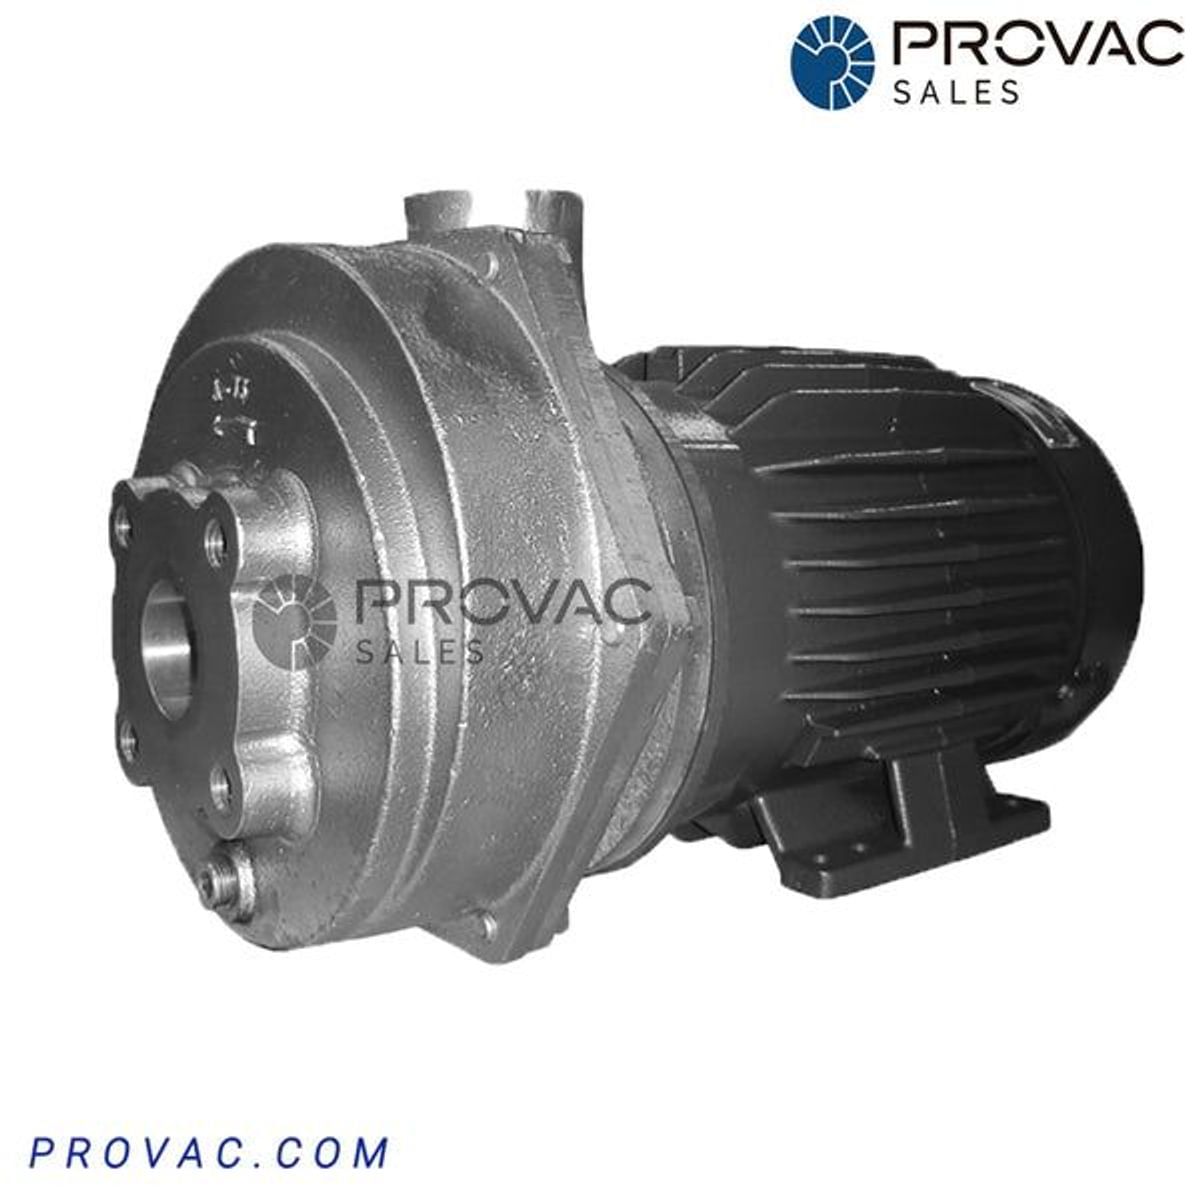 Water Ring Vacuum Pumps - Everest Pumps & Systems